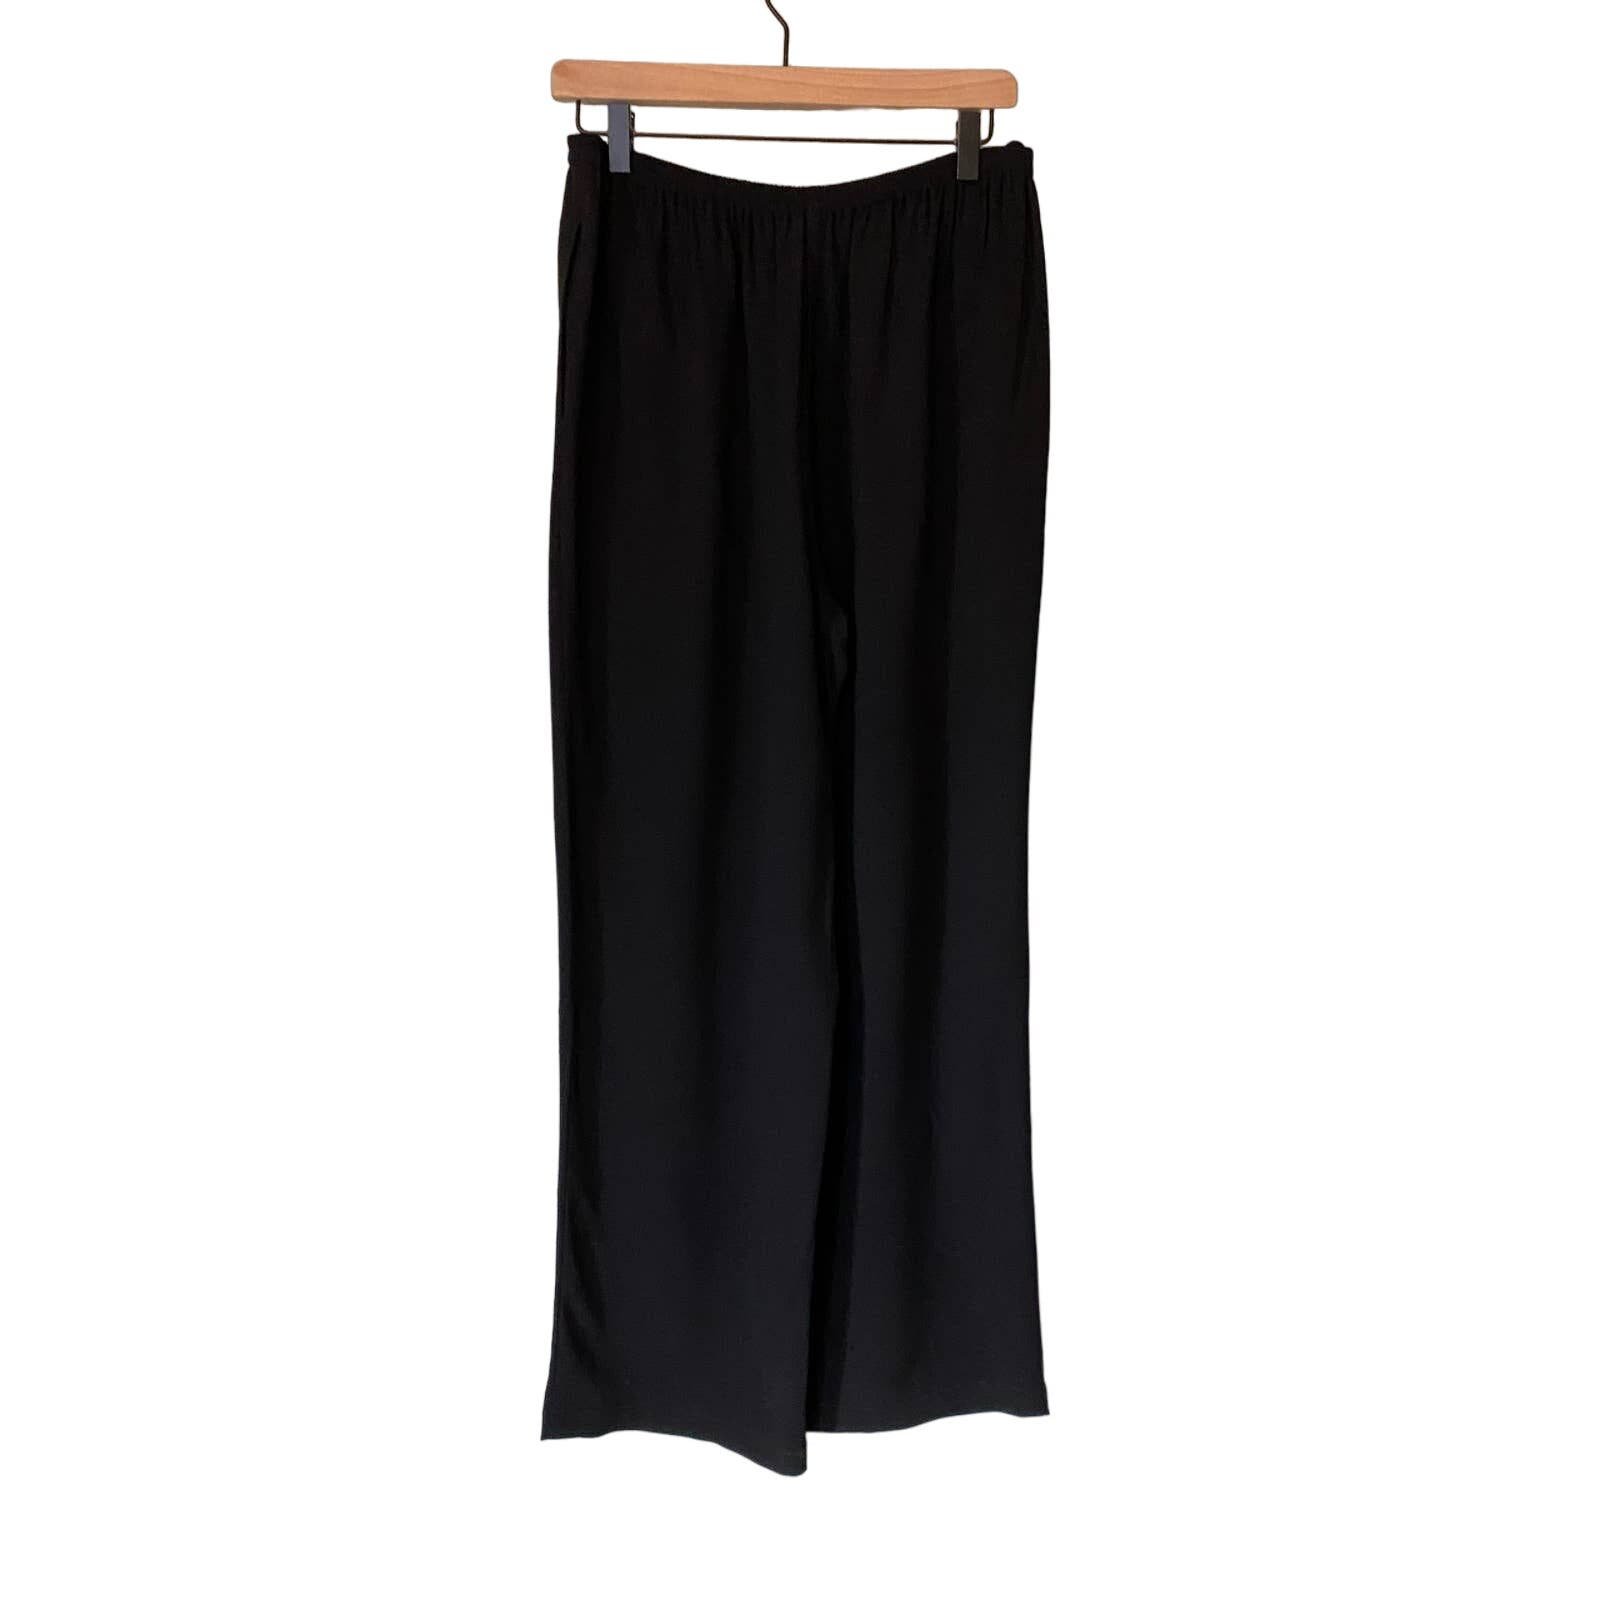 Personality Eileen Fisher Black Wide Leg Pants Small j3